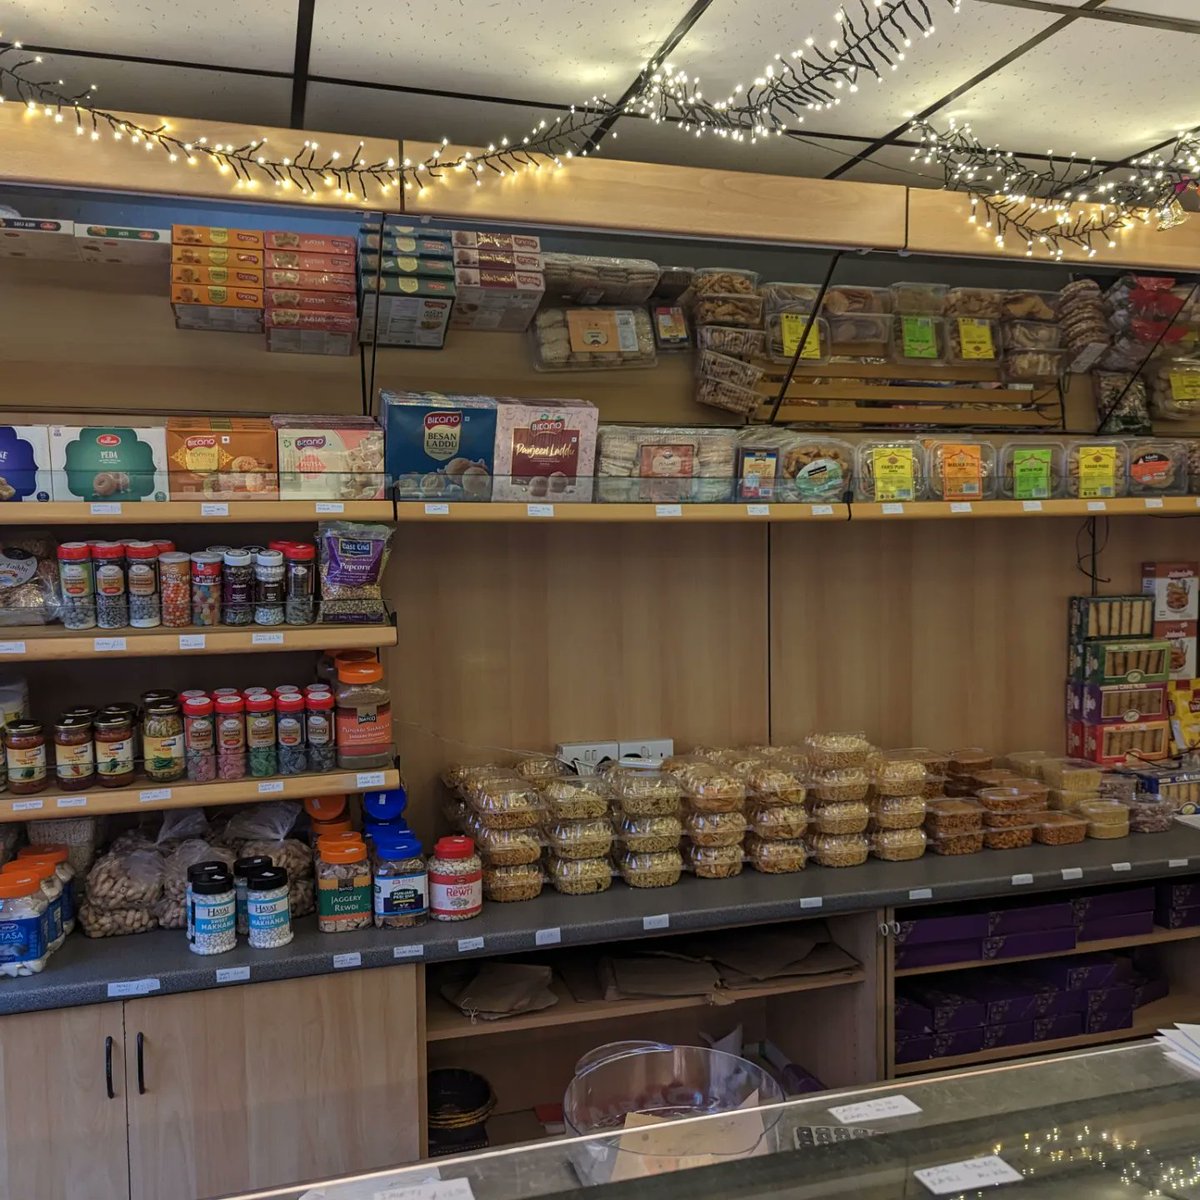 A new Panjabi Street Food store has just opened in the #CityofDoncaster on Printing Office Street called Haveli Panjab Di. They offer a wide variety of authentic and homemade Indian food. 

Why not #thinklocal & support the opening of this new business!

#investment #newbusiness